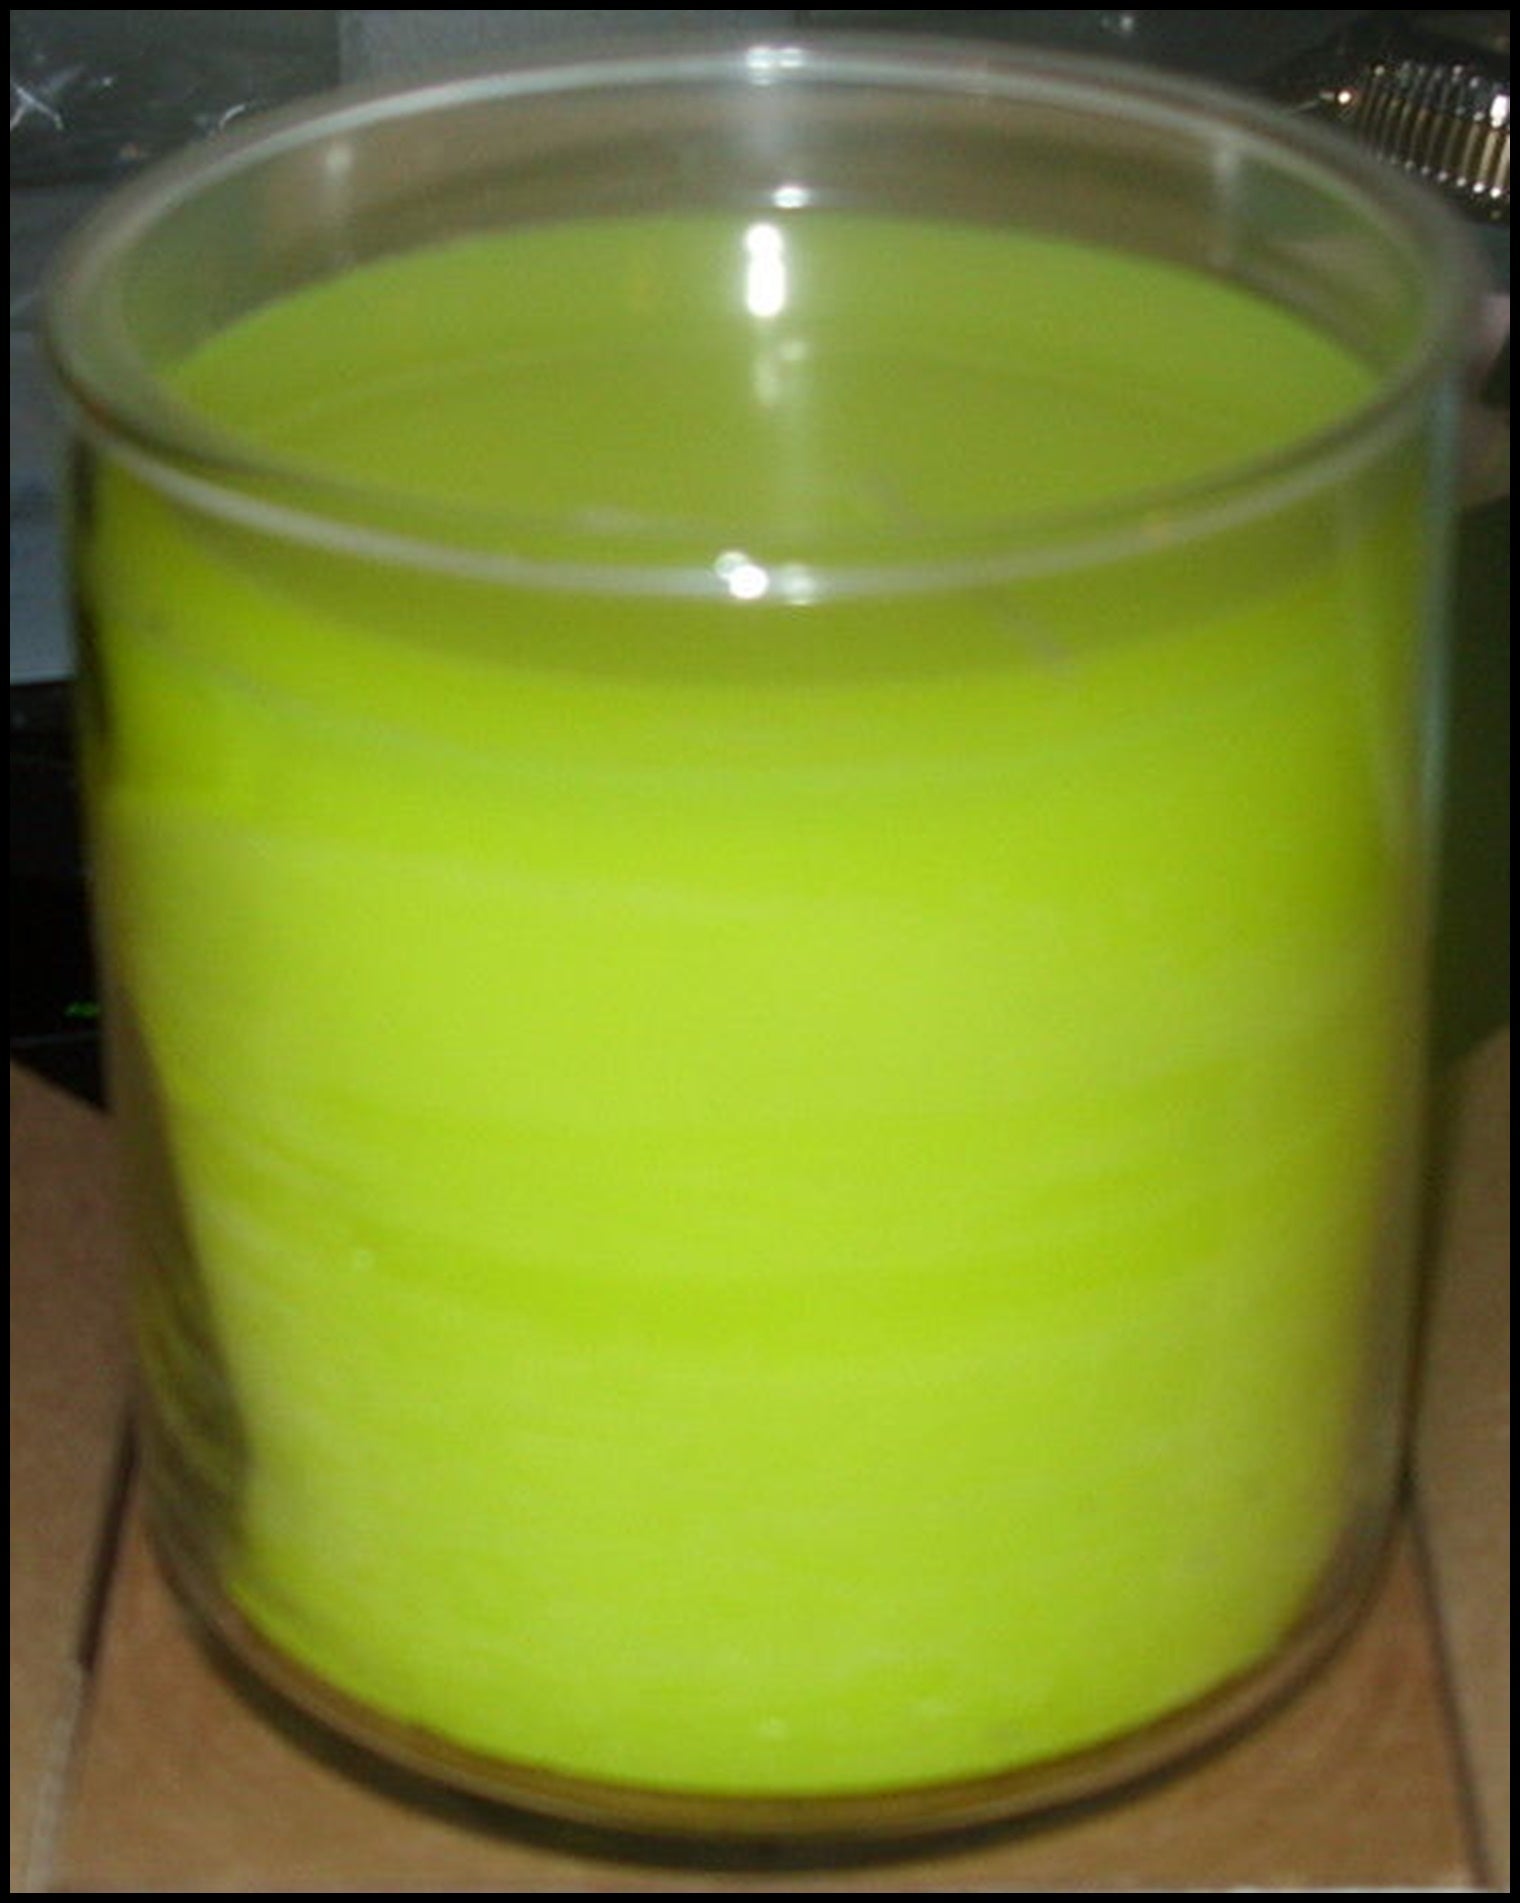 PartyLite GLOLITE GLOW LIGHT 2-Wick Round Glass Jar Boxed Candle HOCUS POCUS - Plastic Glass and Wax